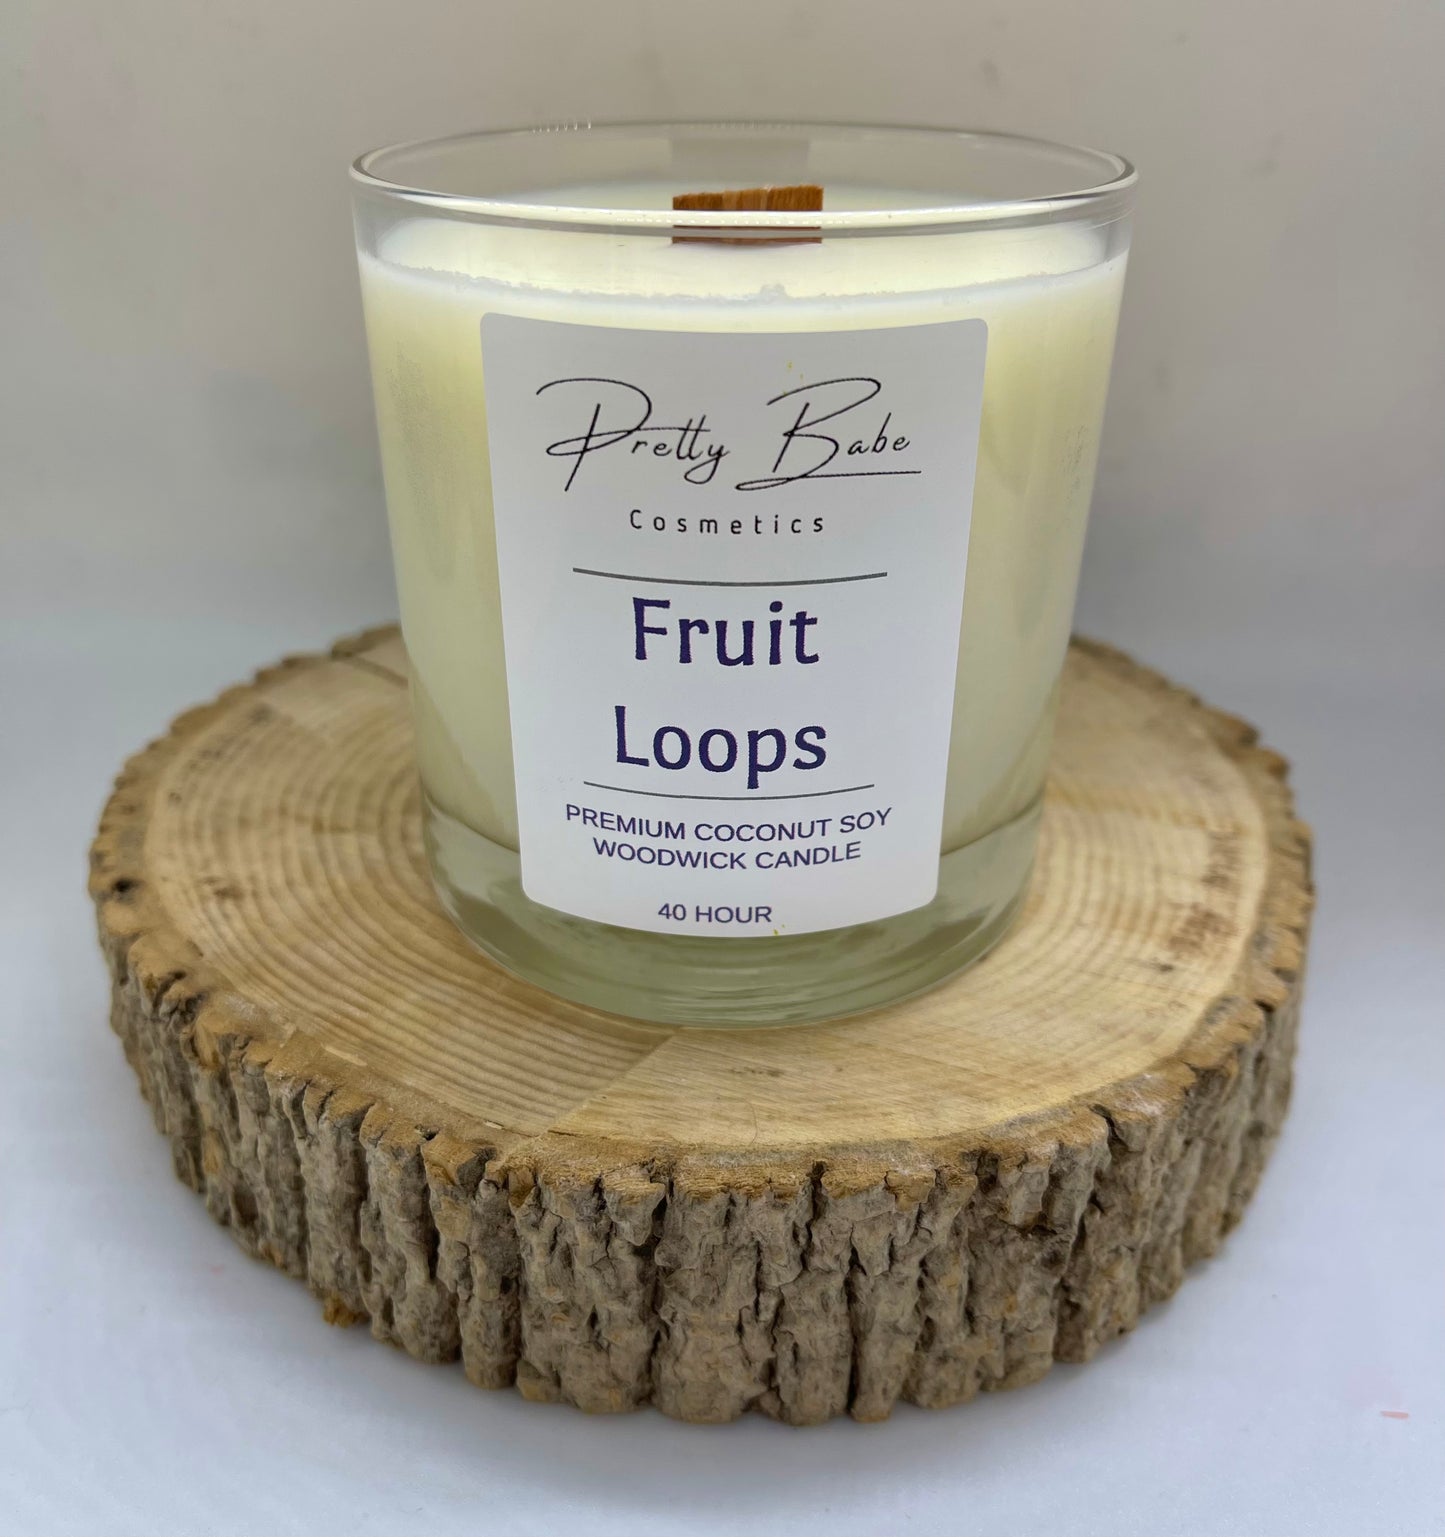 Pretty Babe Premium Coconut Soy Wood Wick 40 Hour Candles